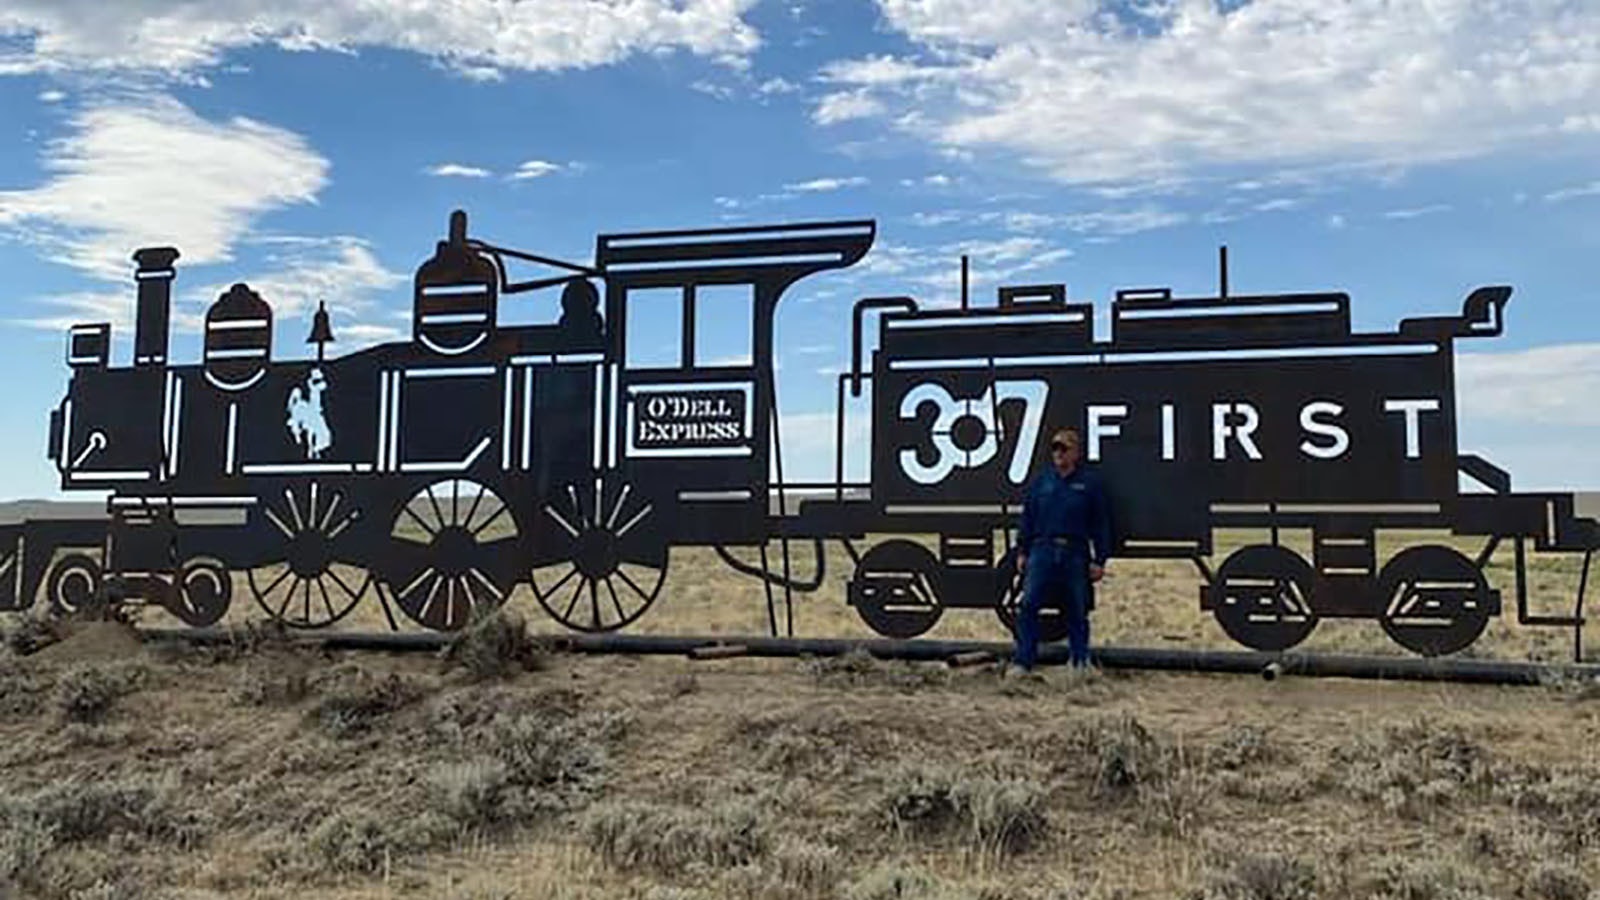 The O'Dell Express is a nod to Wyoming's railroading history.